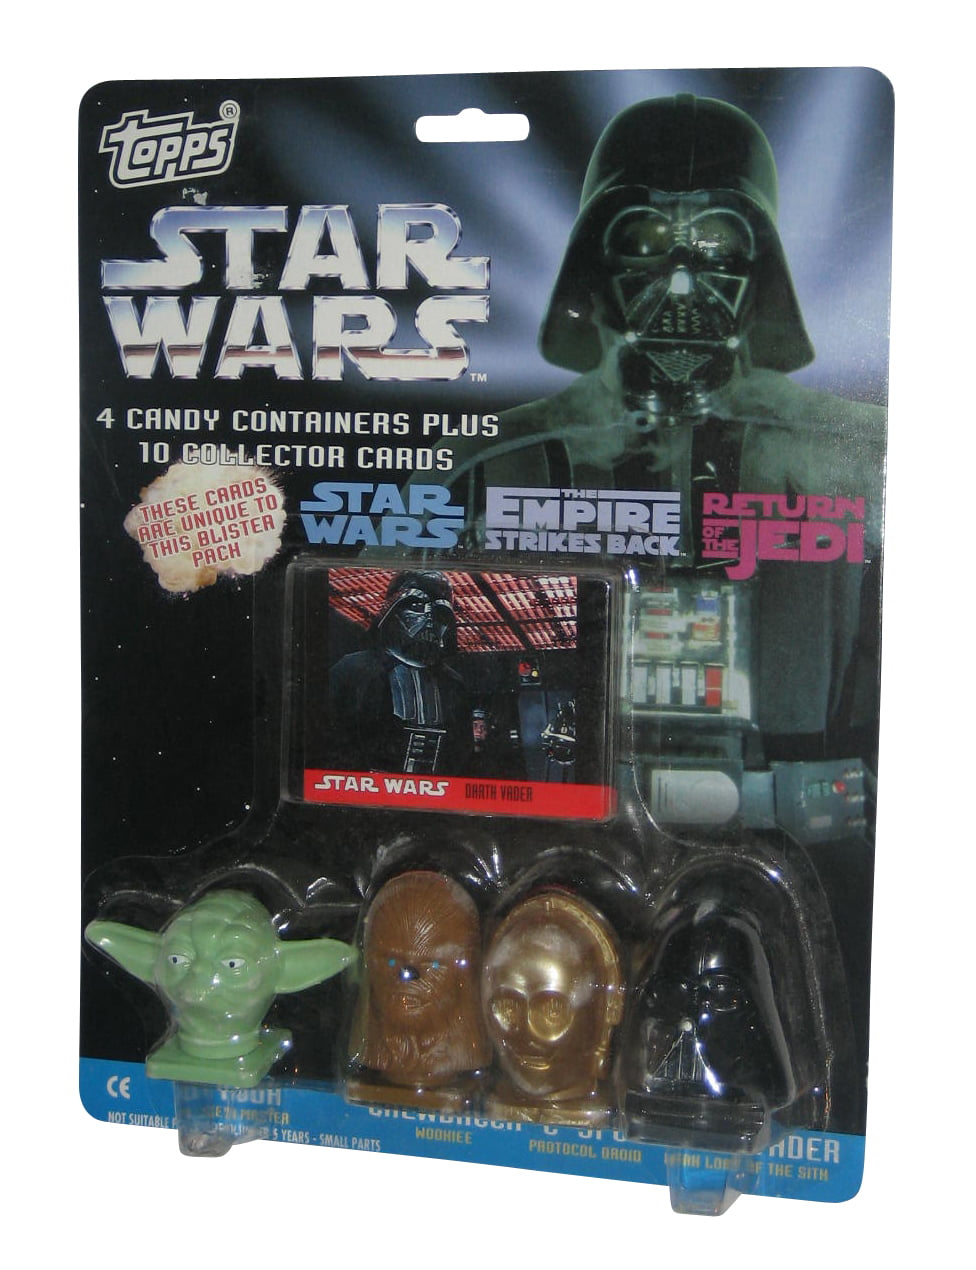 Star Wars TOPPS Trading Card and Candy Container YODA 